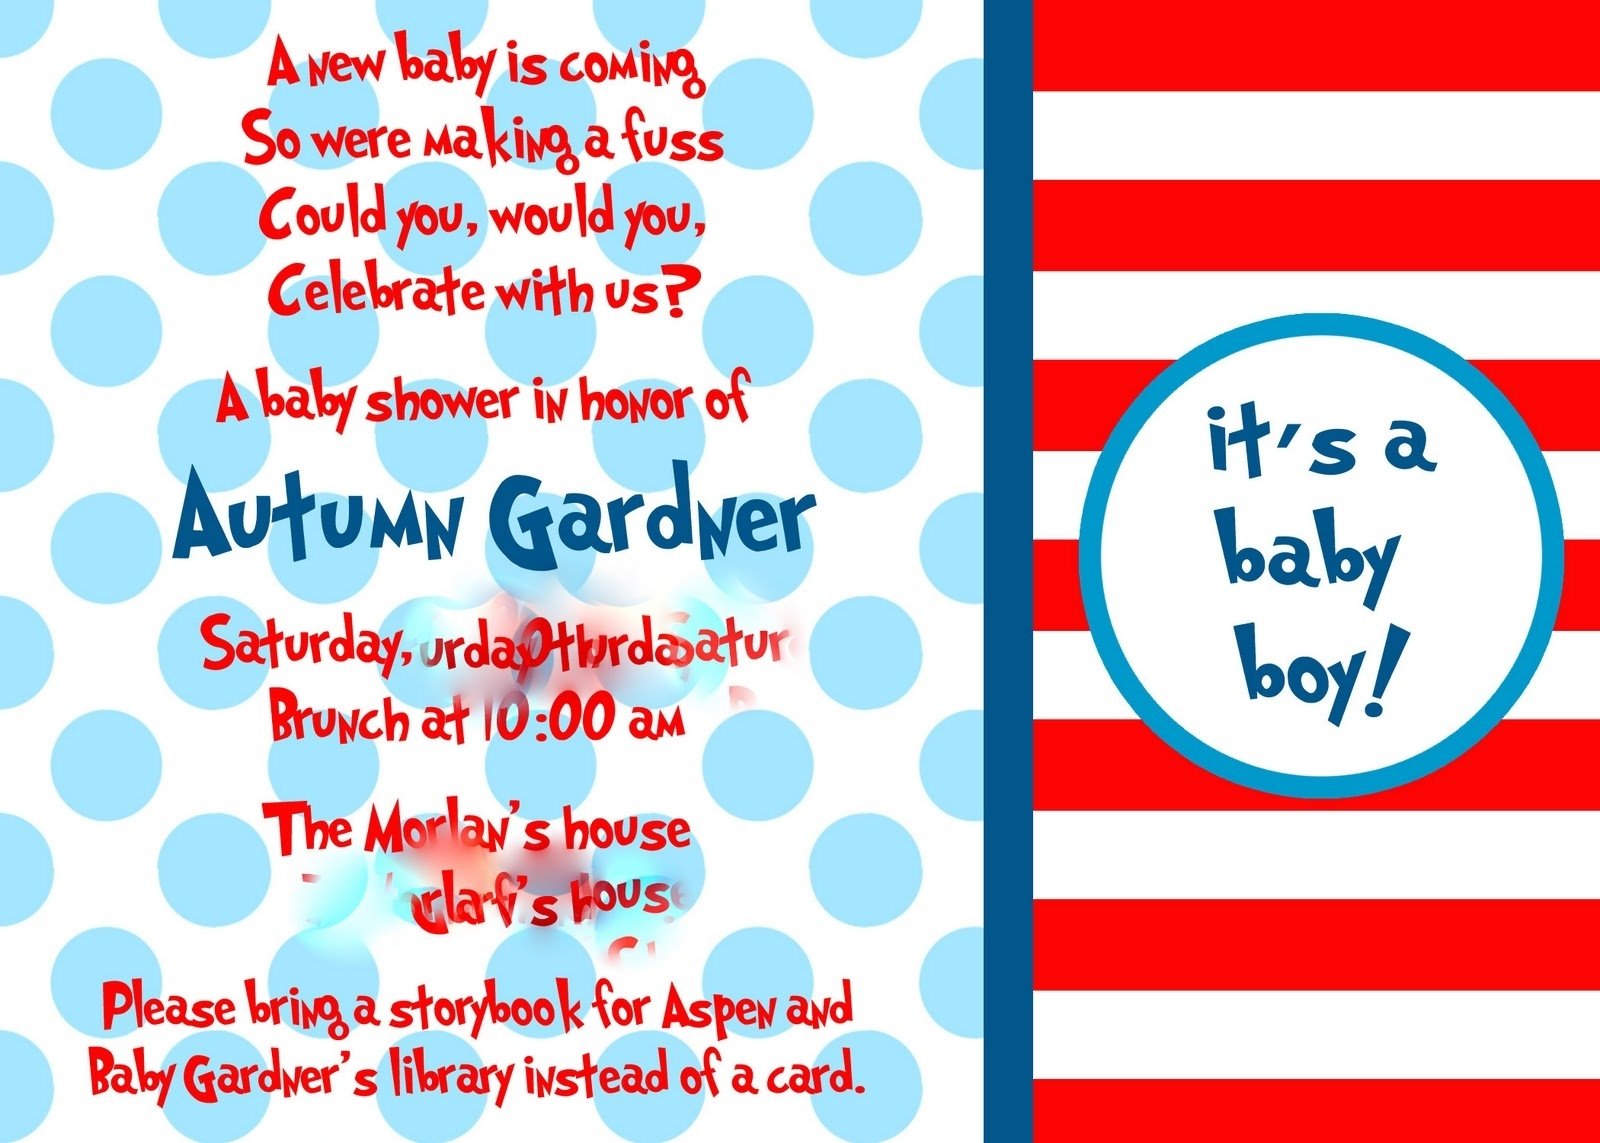 10 Fashionable Cat In The Hat Baby Shower Ideas cat in the hat baby shower 1 2022